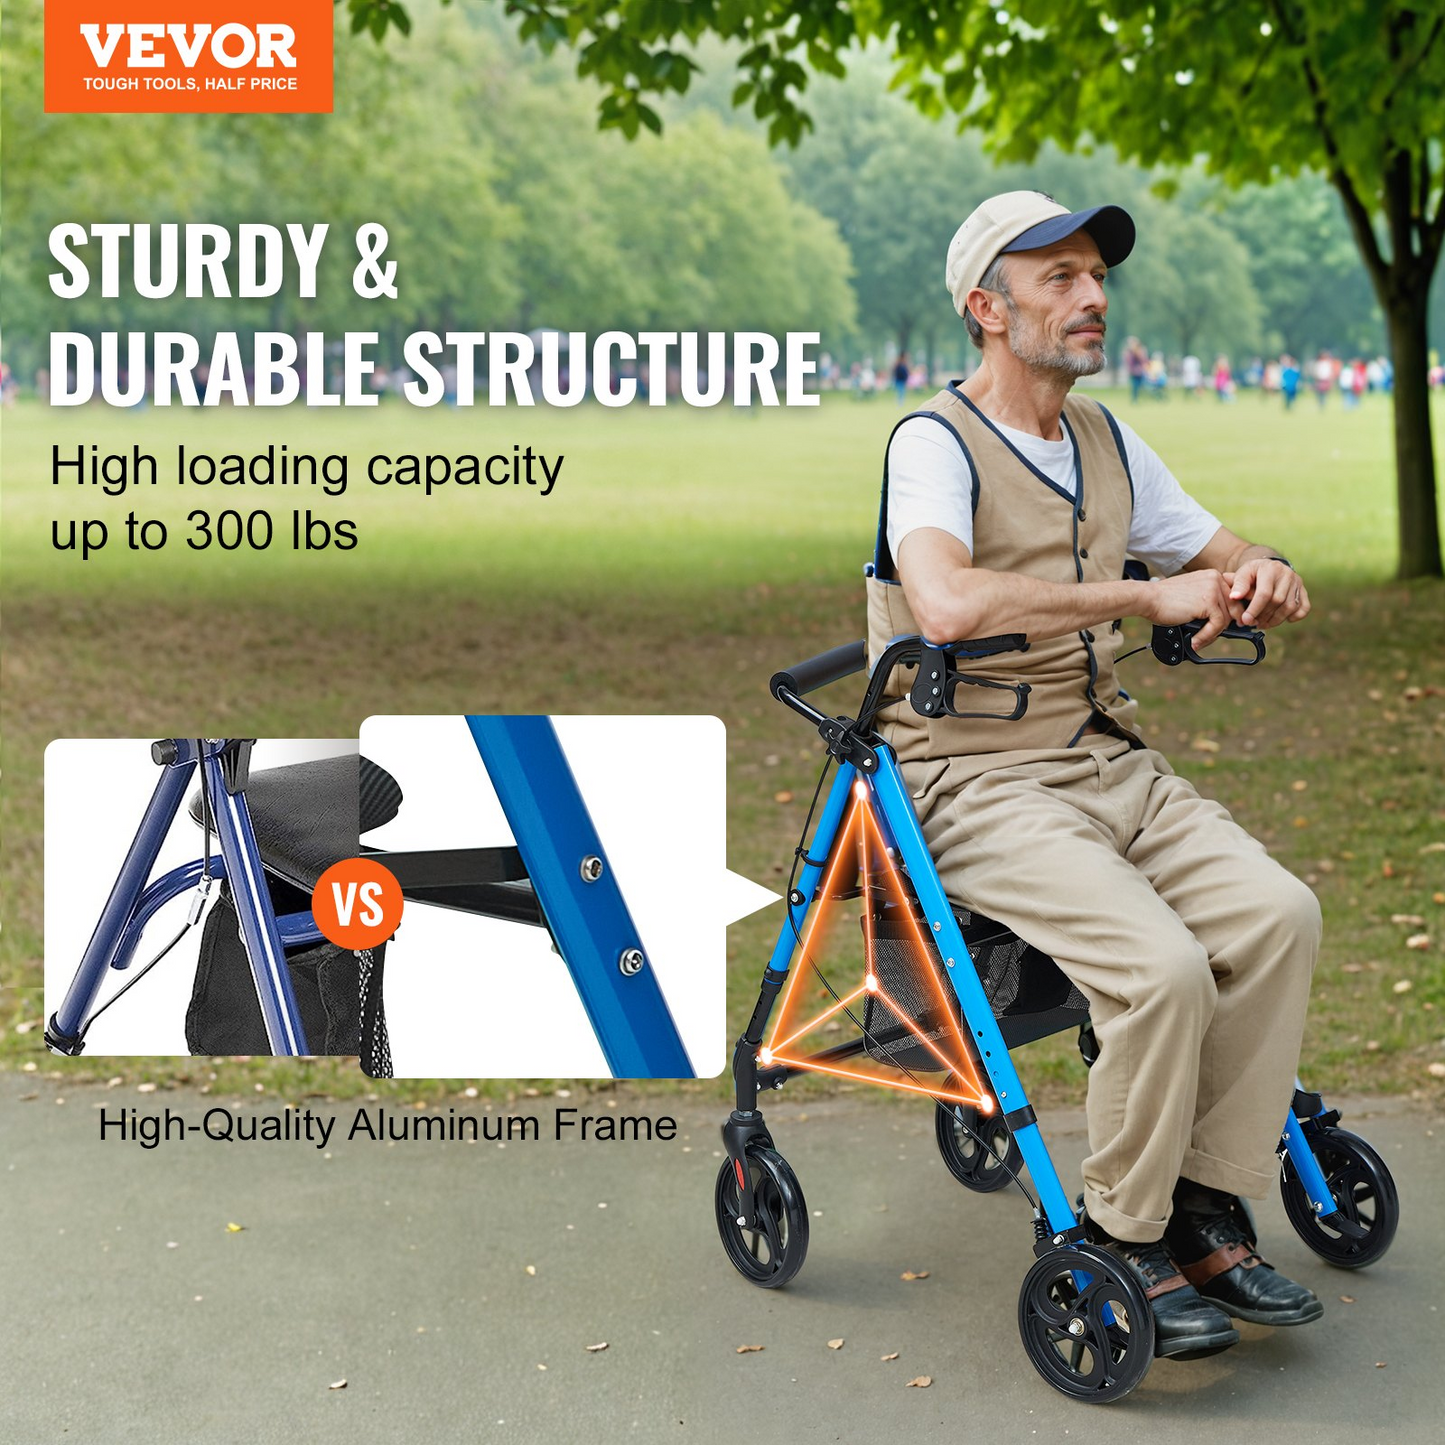 VEVOR Rollator Walker for Seniors and Adult, Lightweight Aluminum Foldable Rolling Walker with Adjustable Seat and Handle, Outdoor Mobility Rollator Walker with 8" All Terrain Wheels, 300LBS Capacity, Goodies N Stuff